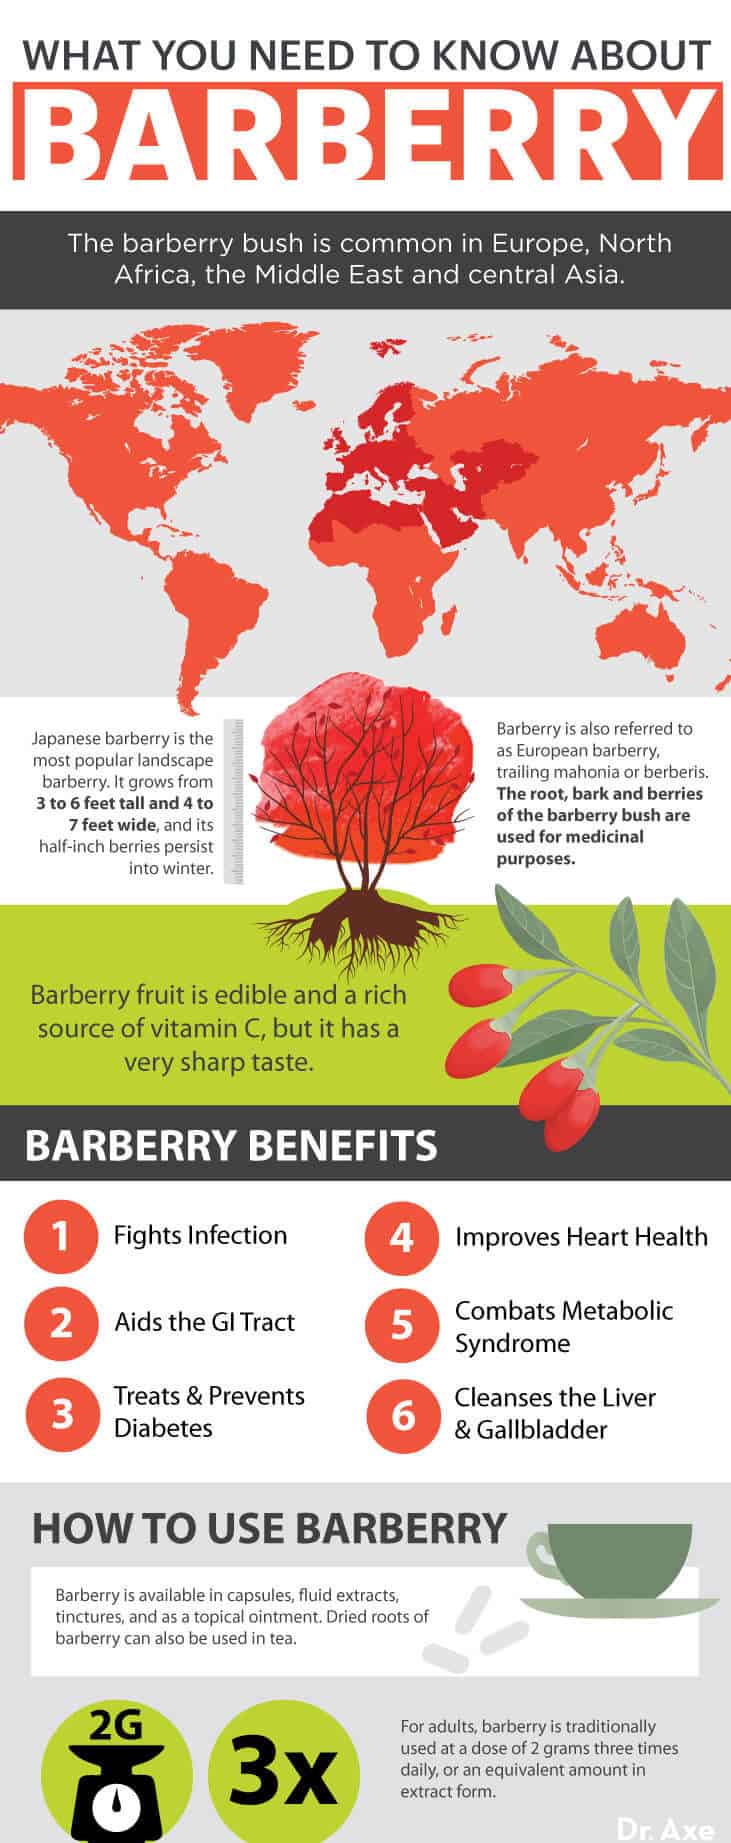 Barberry benefits - Dr. Axe